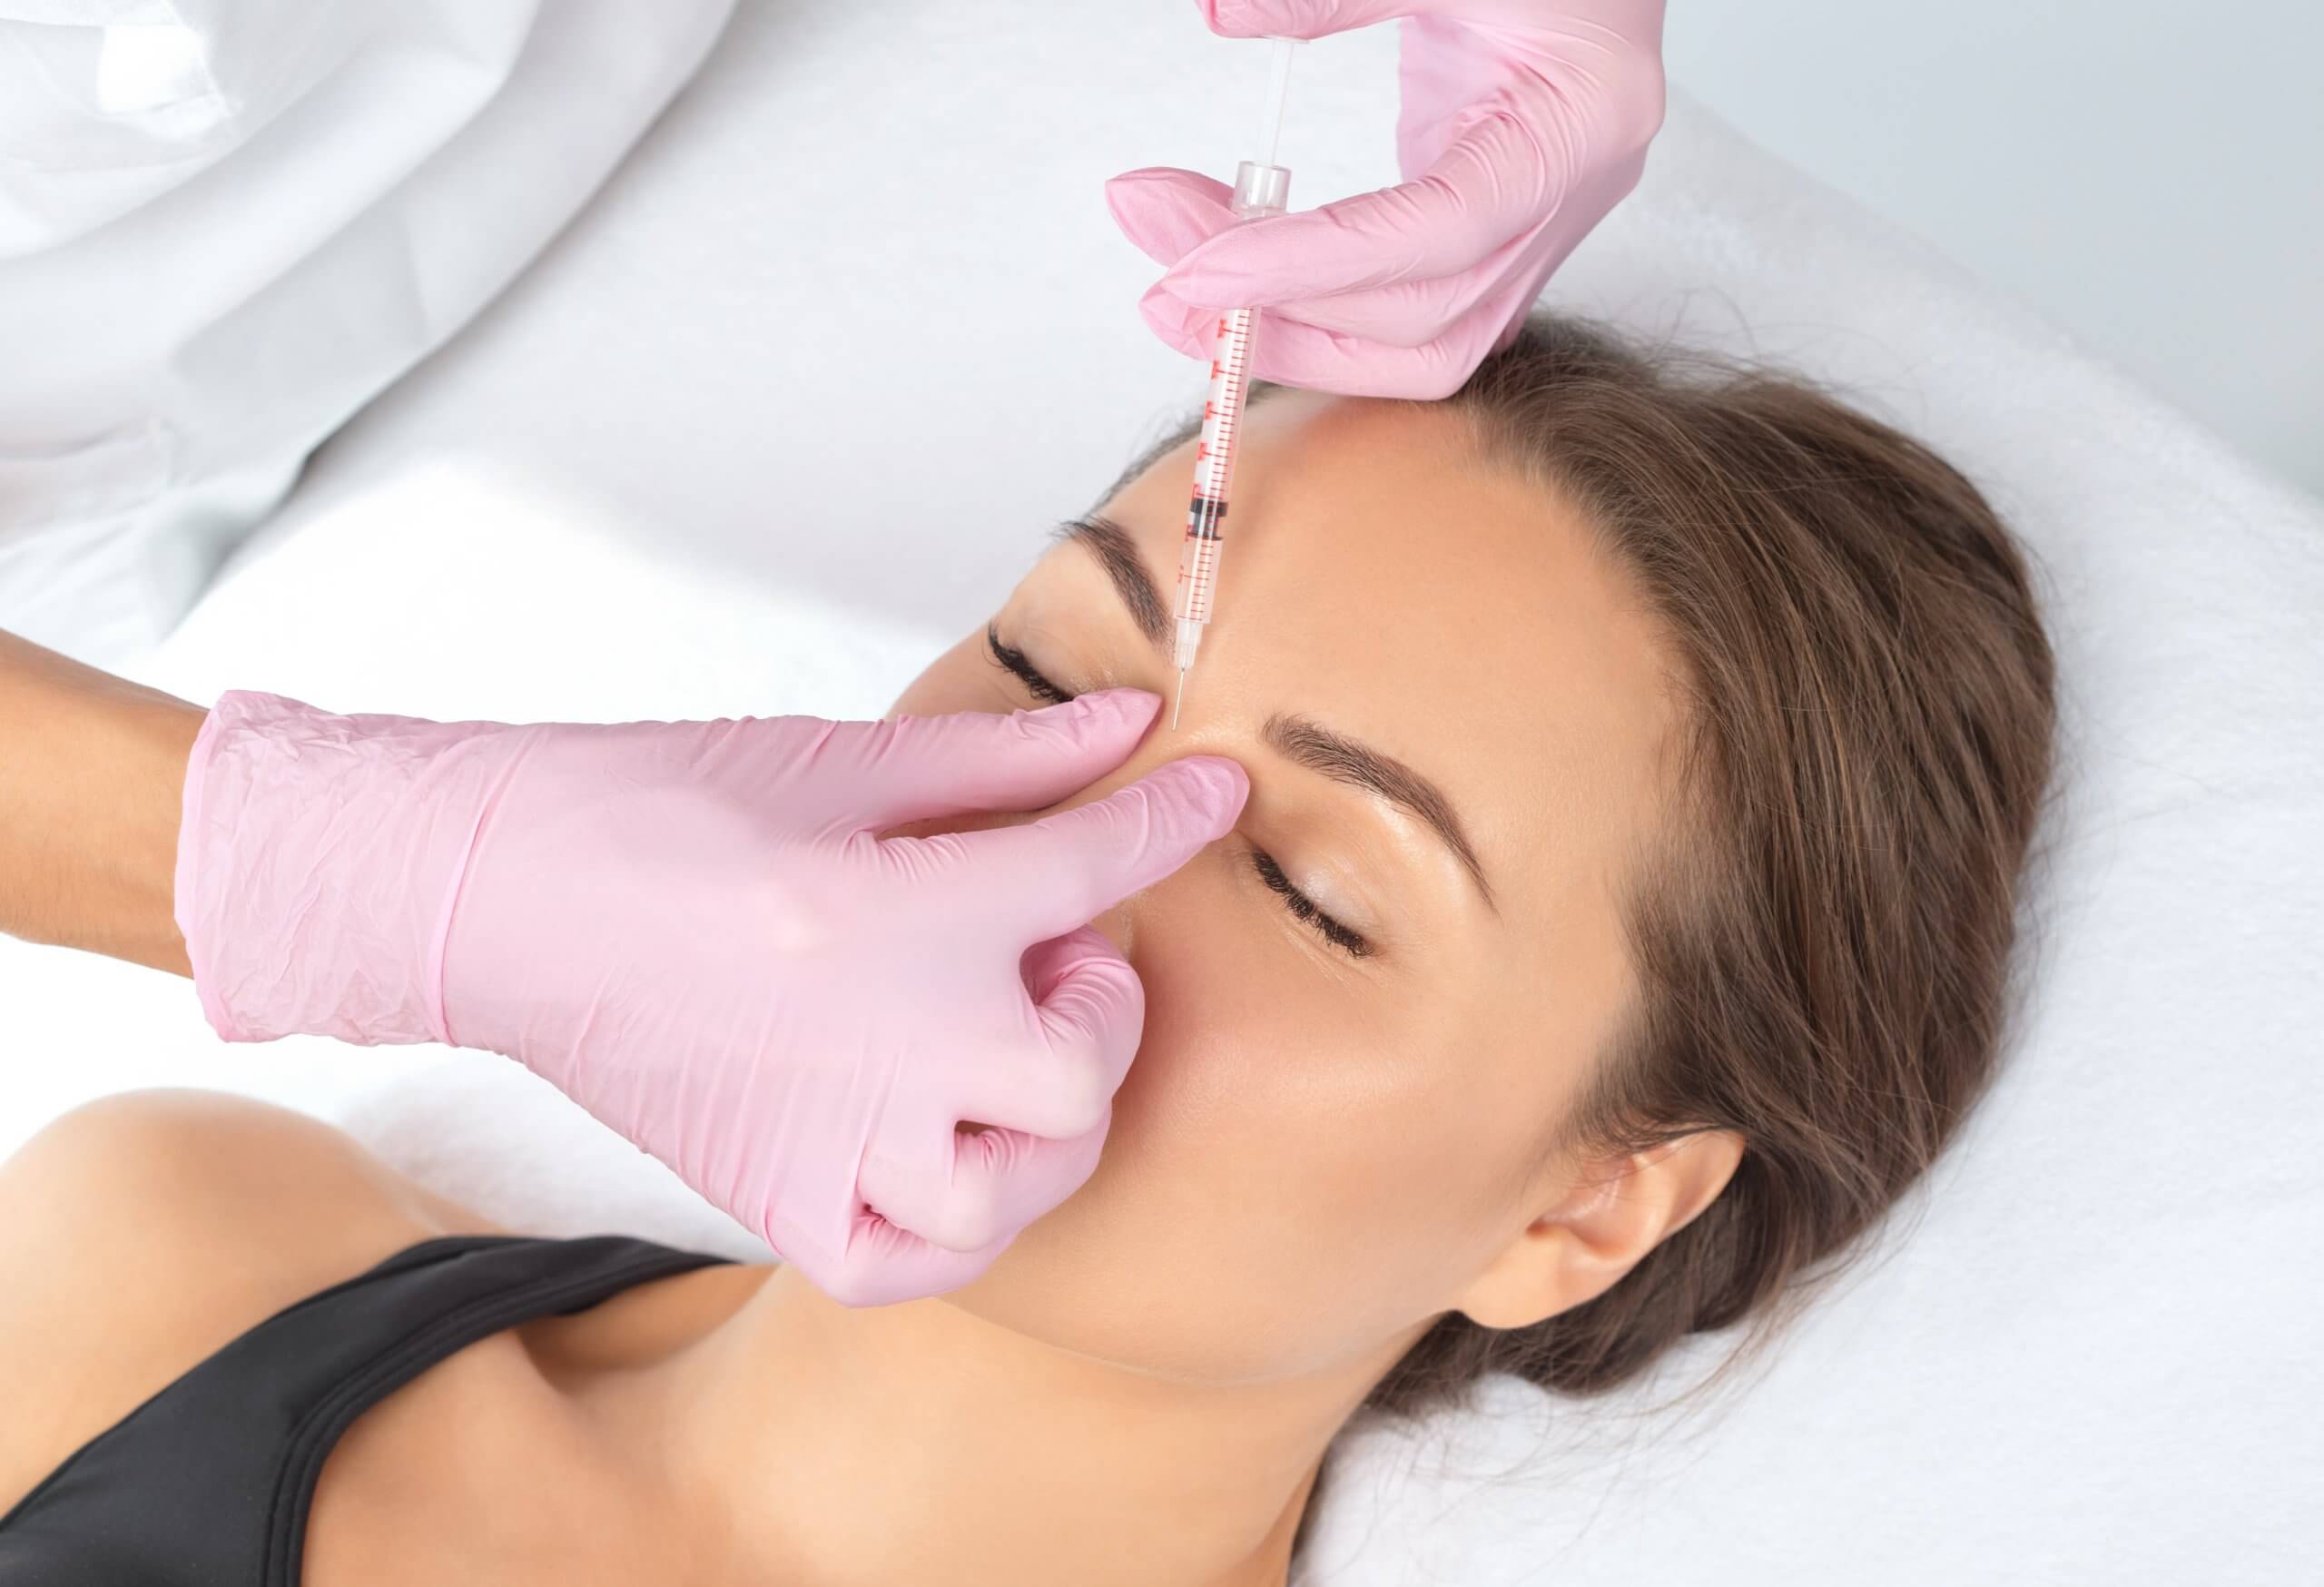 Beautiful Young Woman Getting Botox Injection | National Medspa Training Institute in Colorado Springs, CO